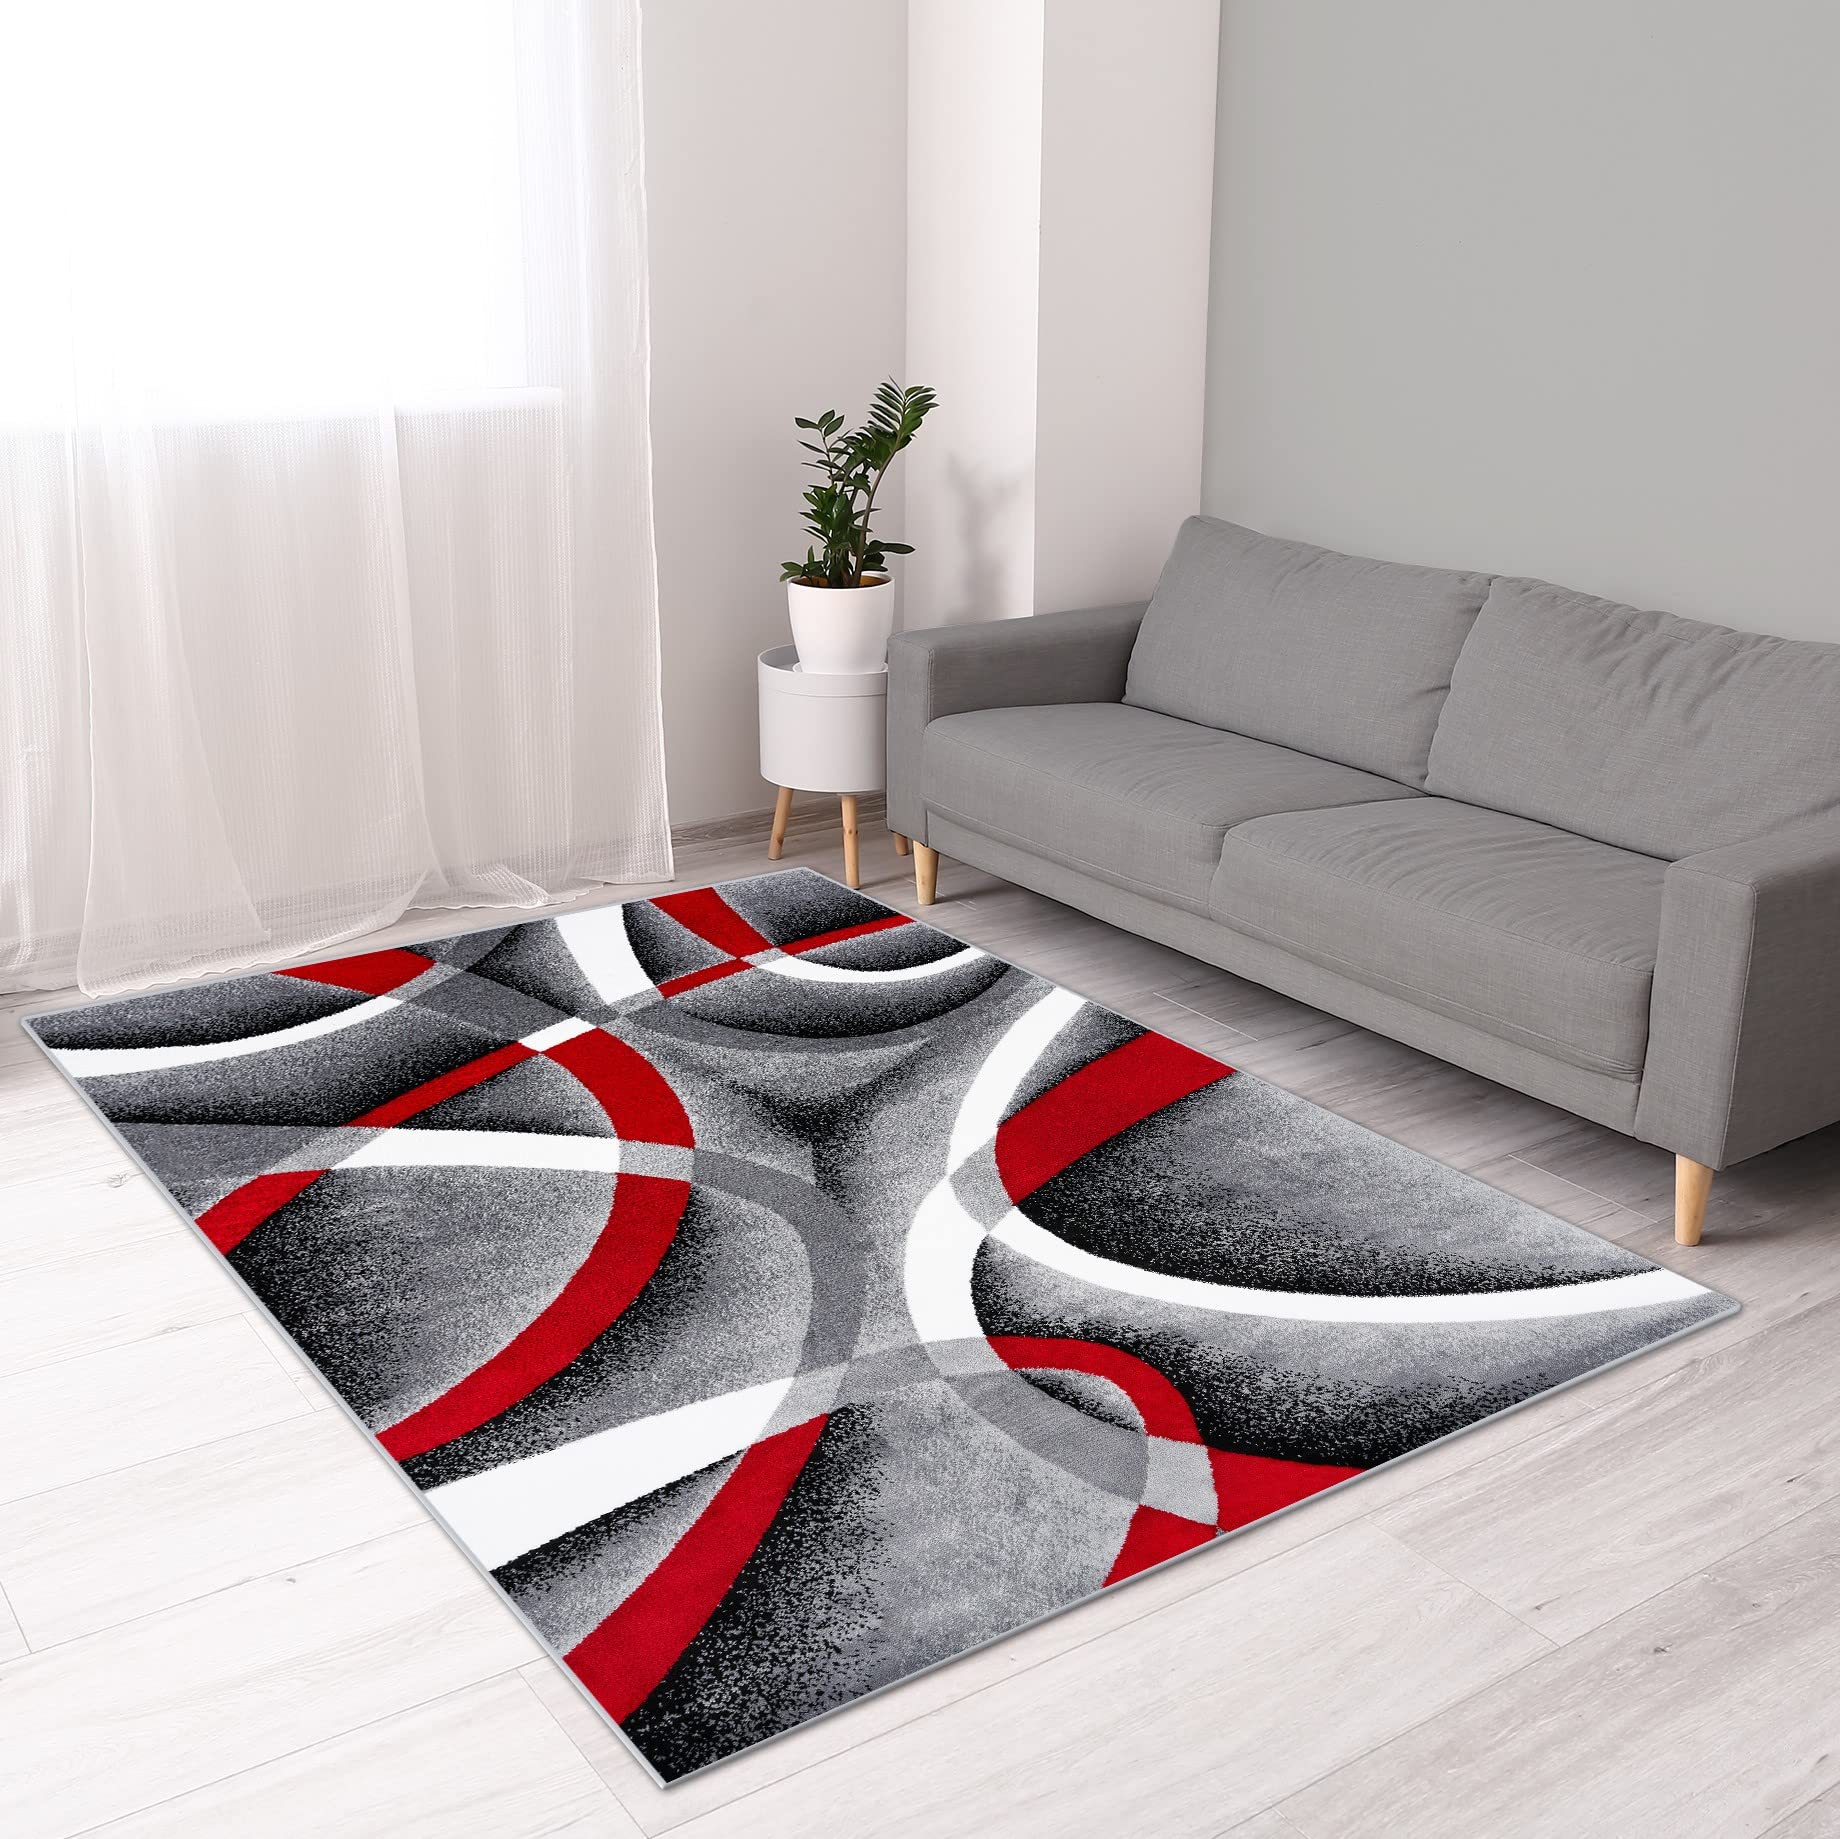 Persian Area Rugs 2305 Gray 2'2 x 7'4 Runner Modern Abstract Area Rug,2305 Gray 2x8